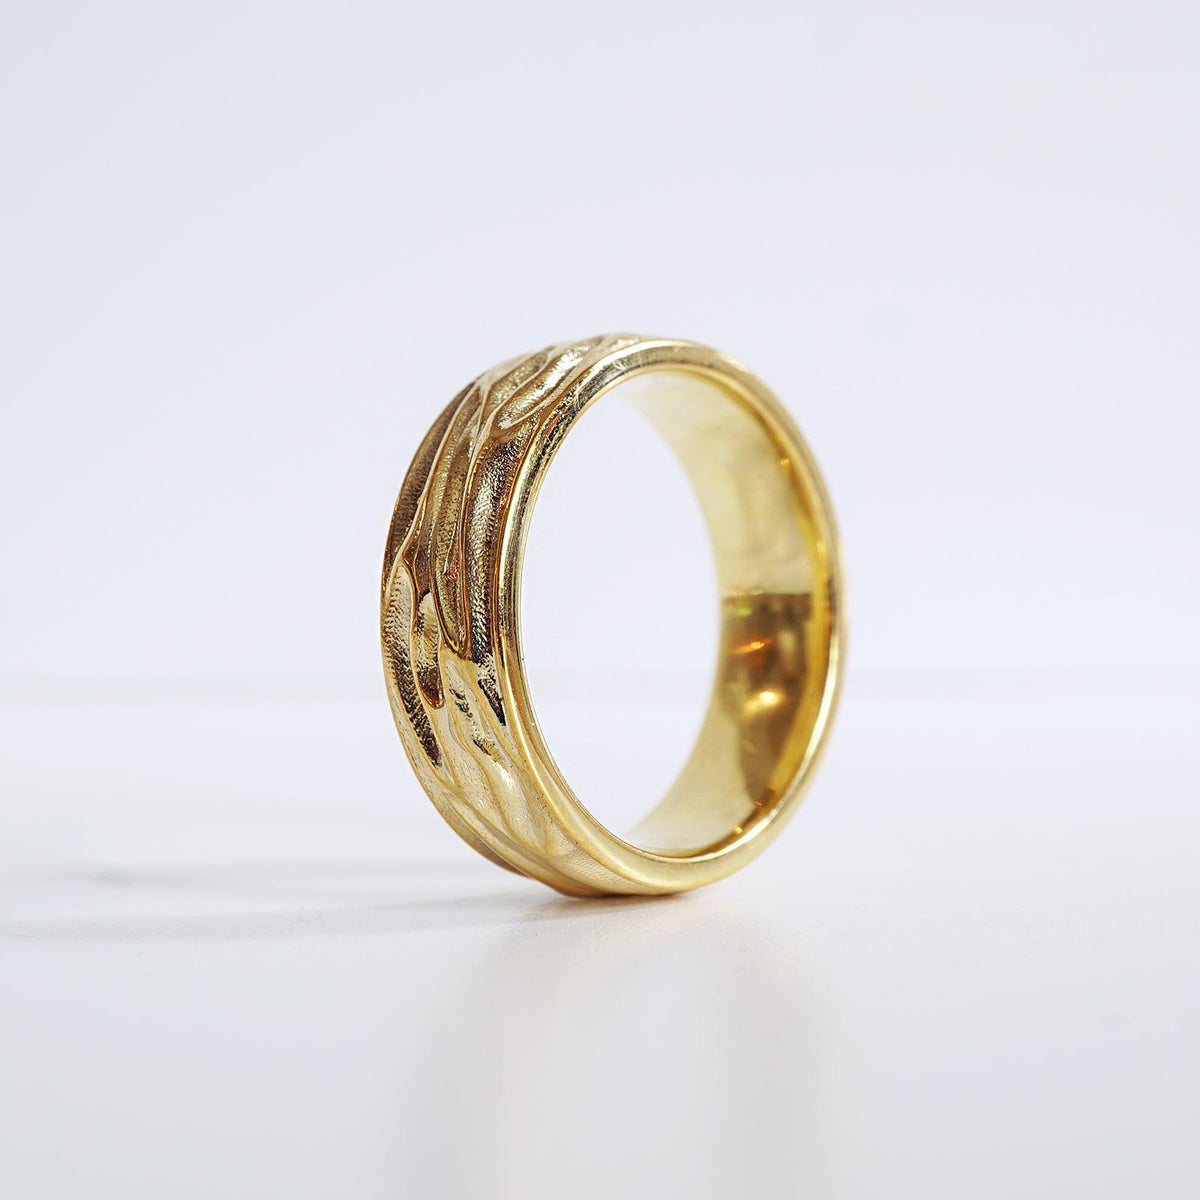 Liquid Ring Band in Sterling Silver and 14K Gold, 7mm